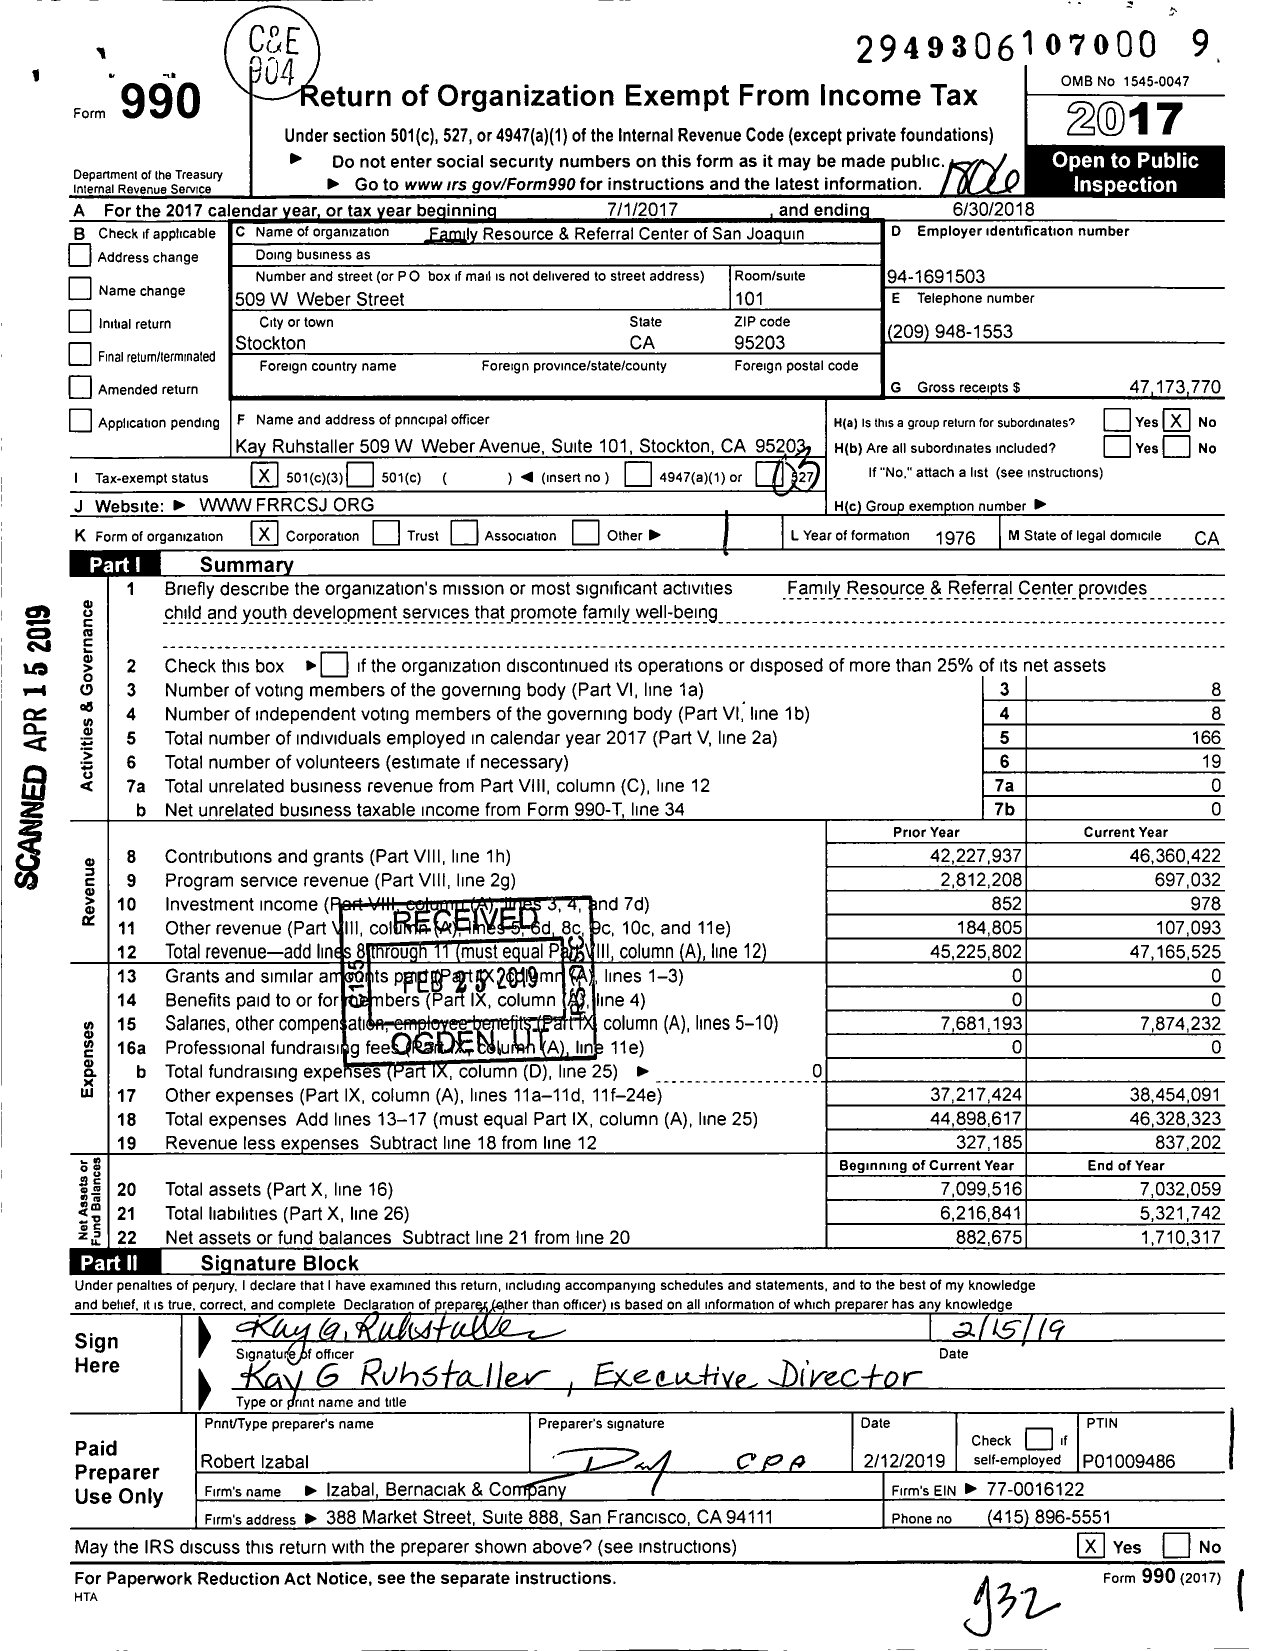 Image of first page of 2017 Form 990 for Family Resource Center / Family Resource & Referral Center of San Joaquin (FRRCSJ)